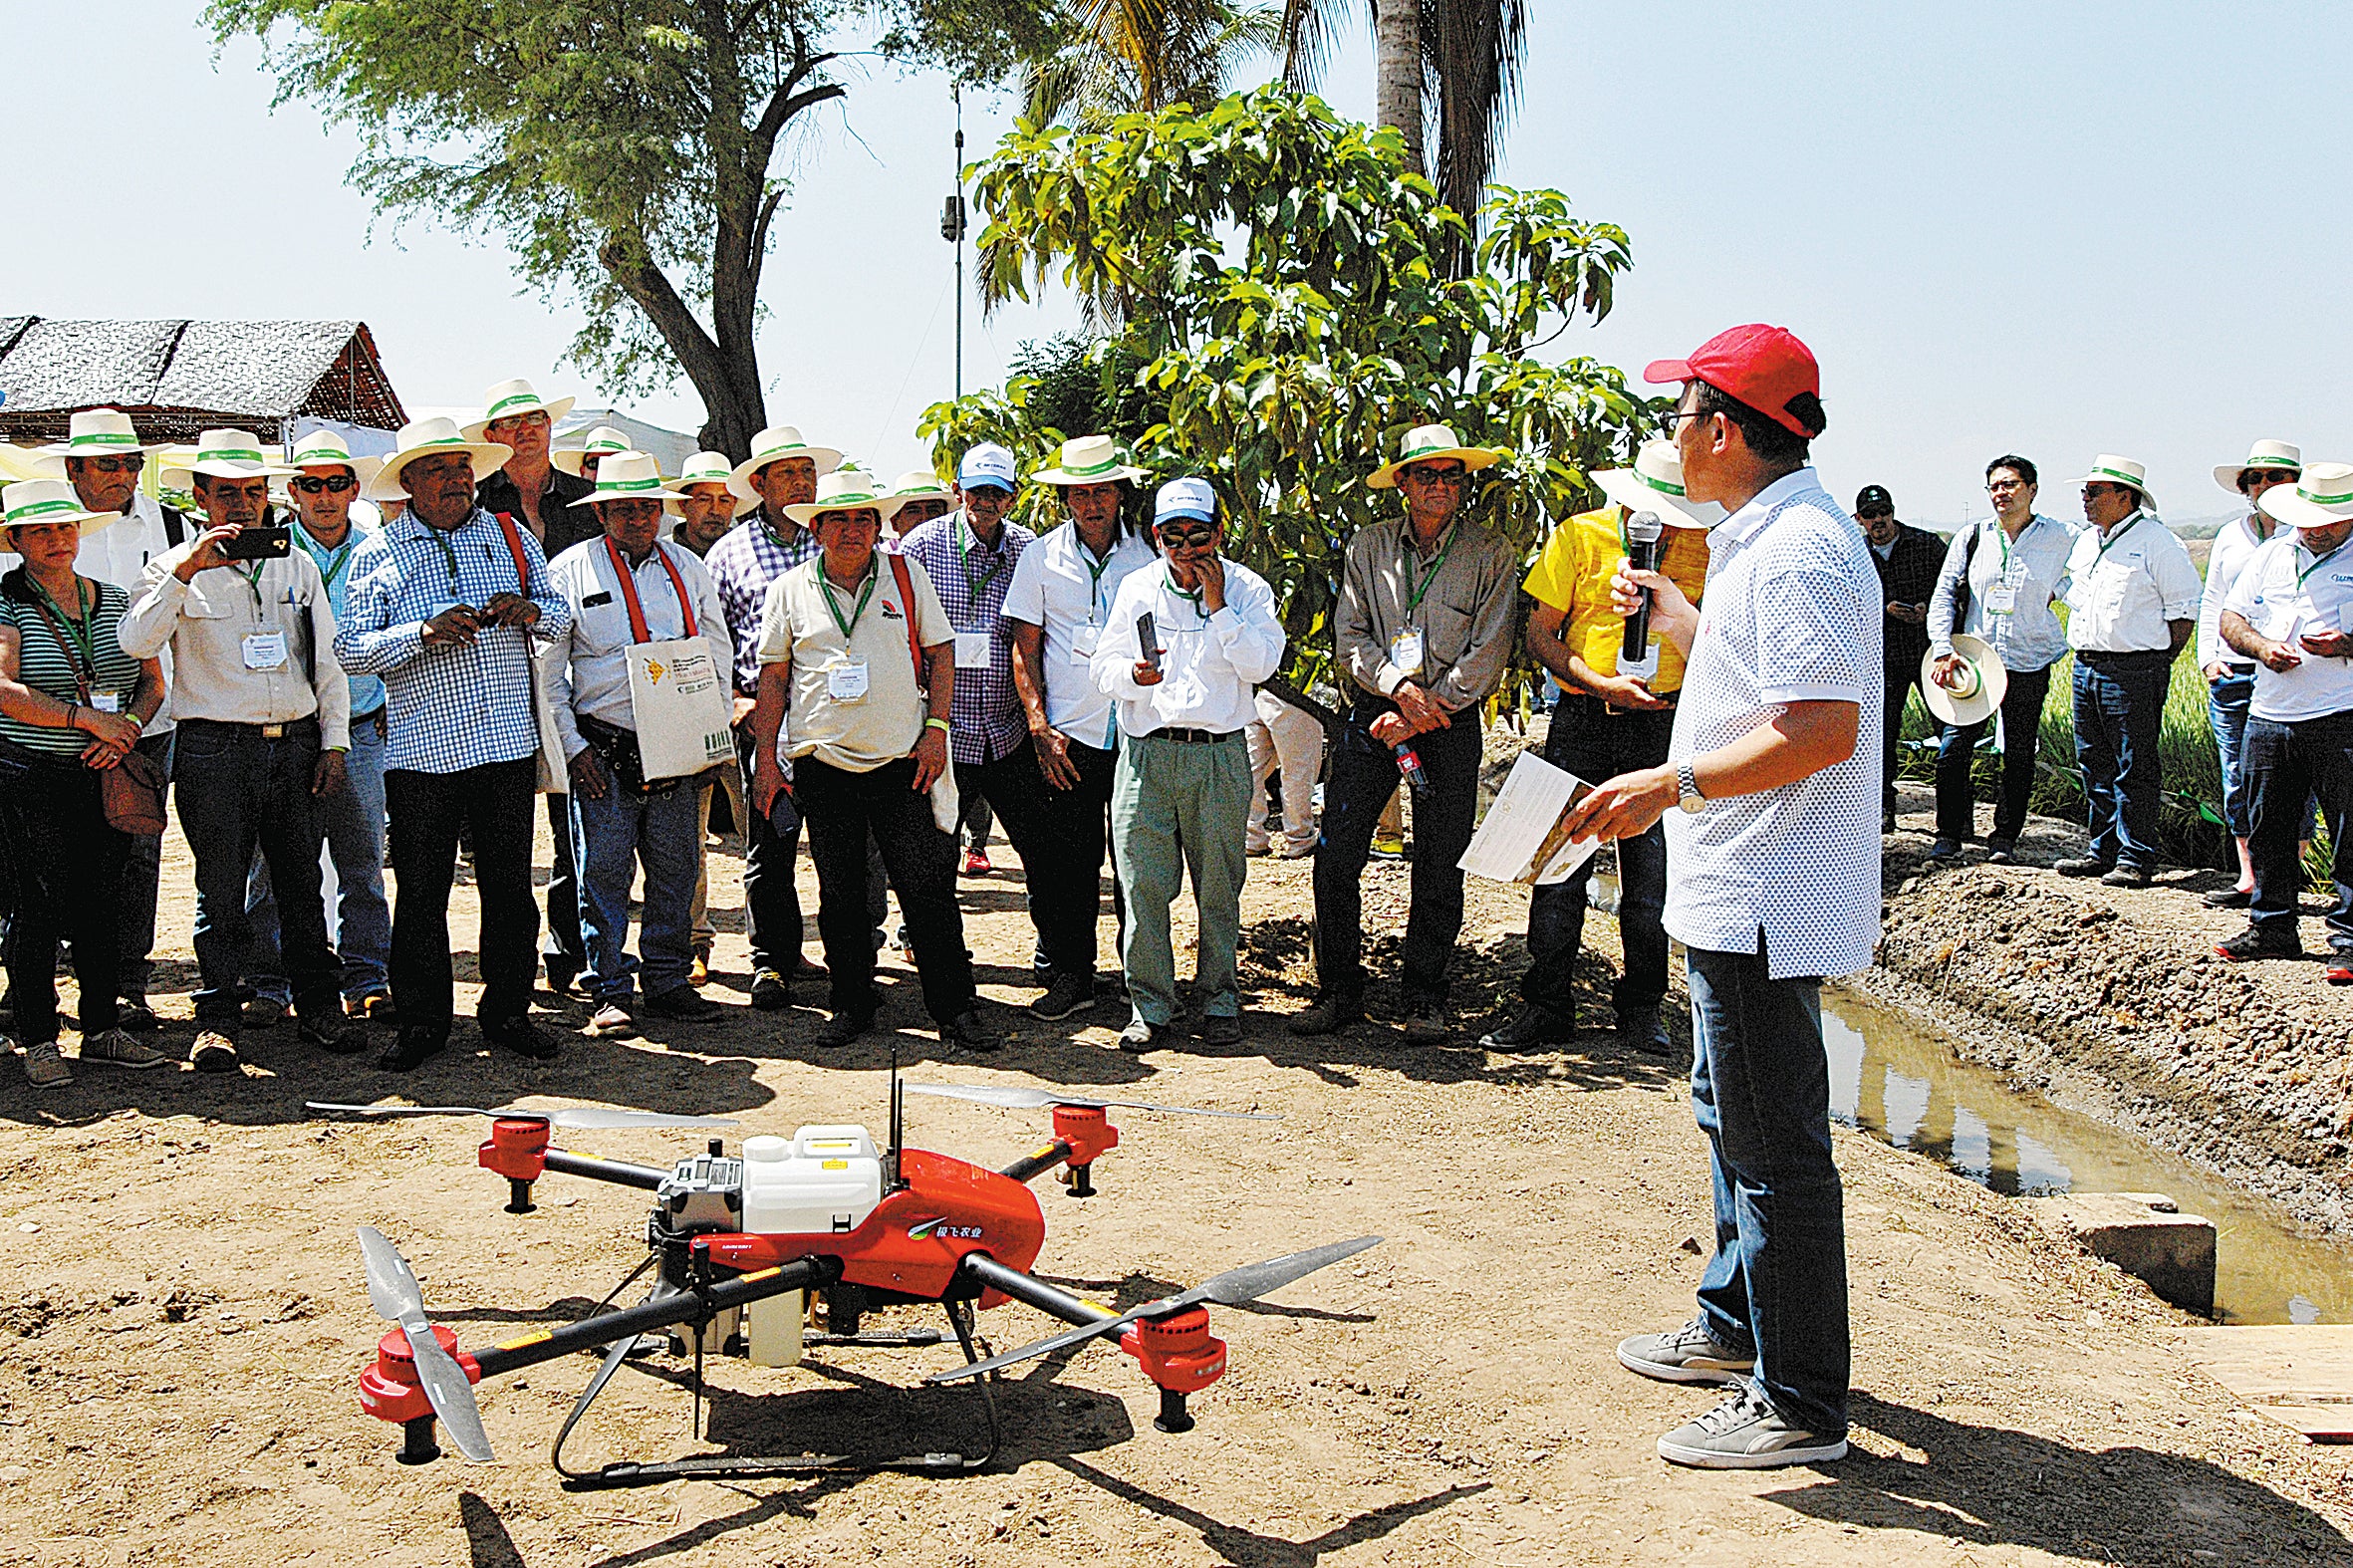 Ma Zhiqiang explains the use of an agricultural drone to farmers in Ecuador